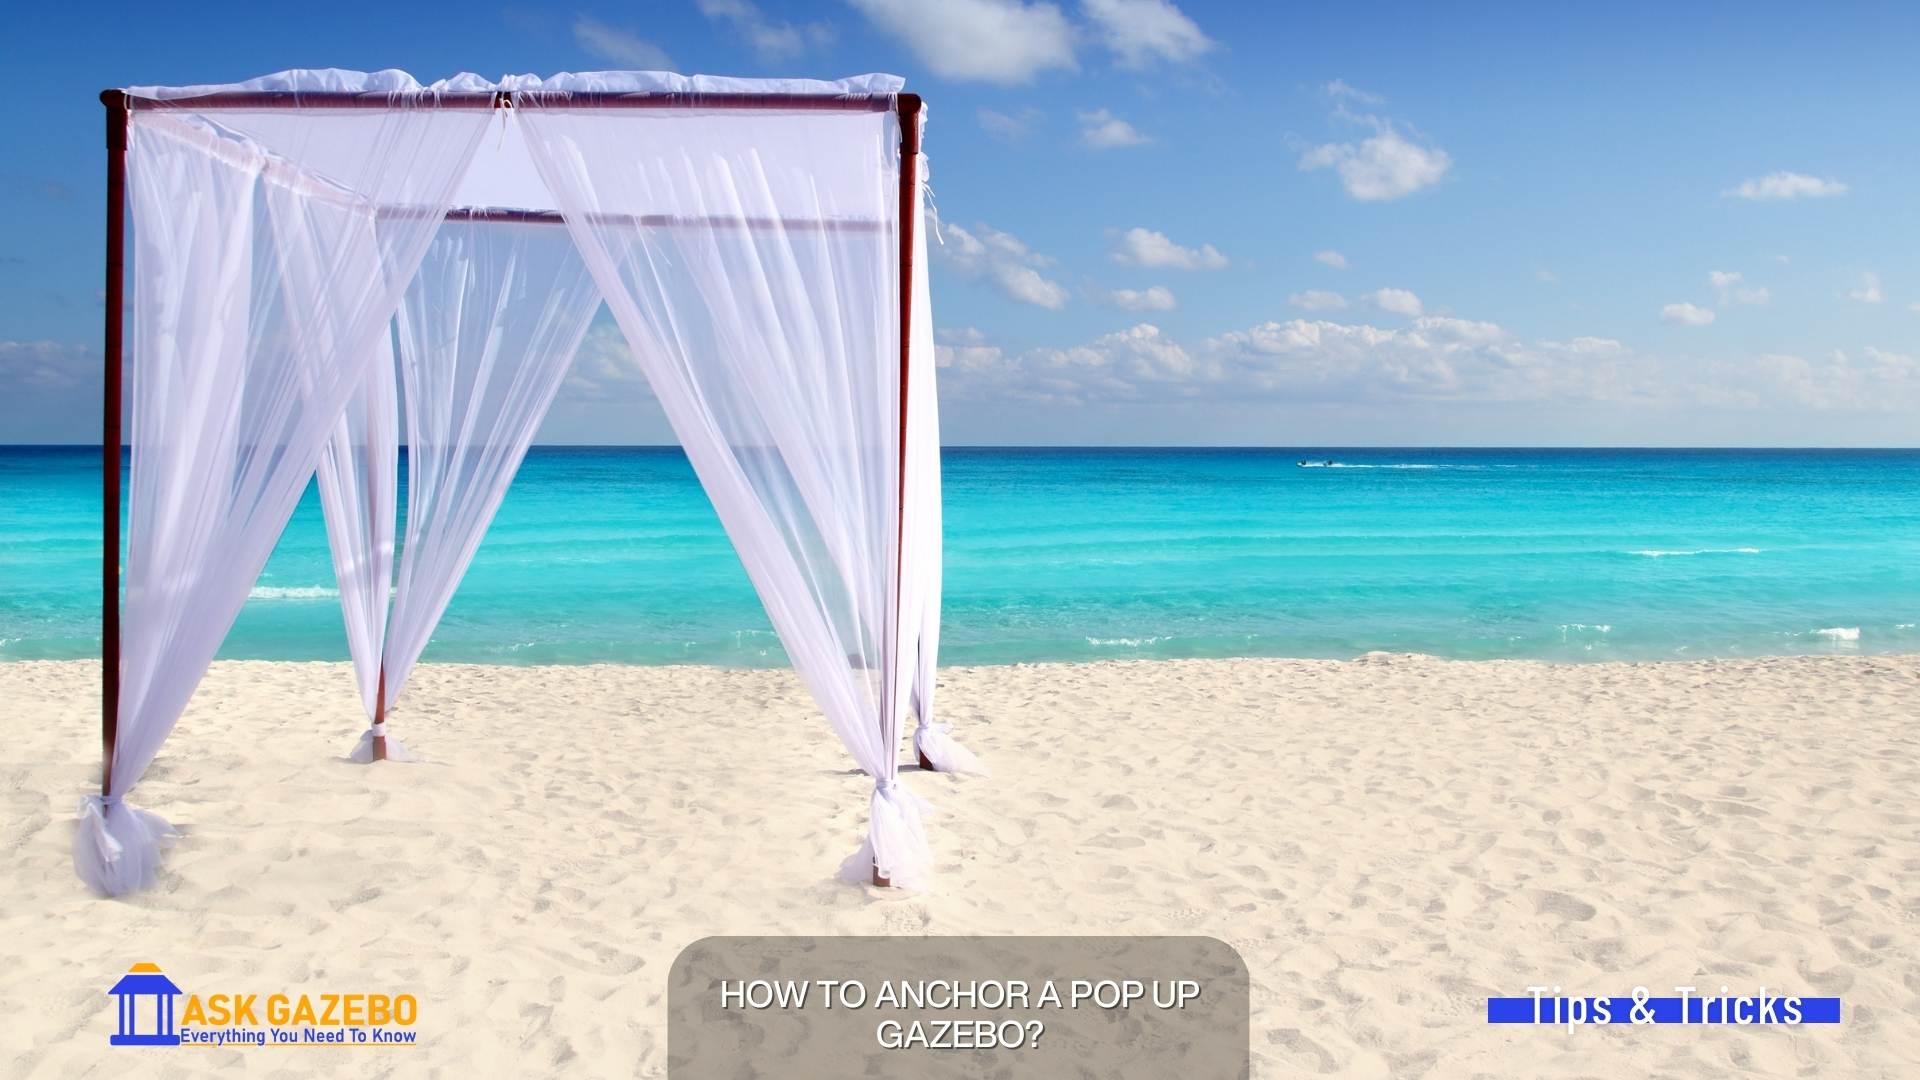 How To Anchor a Pop Up Gazebo